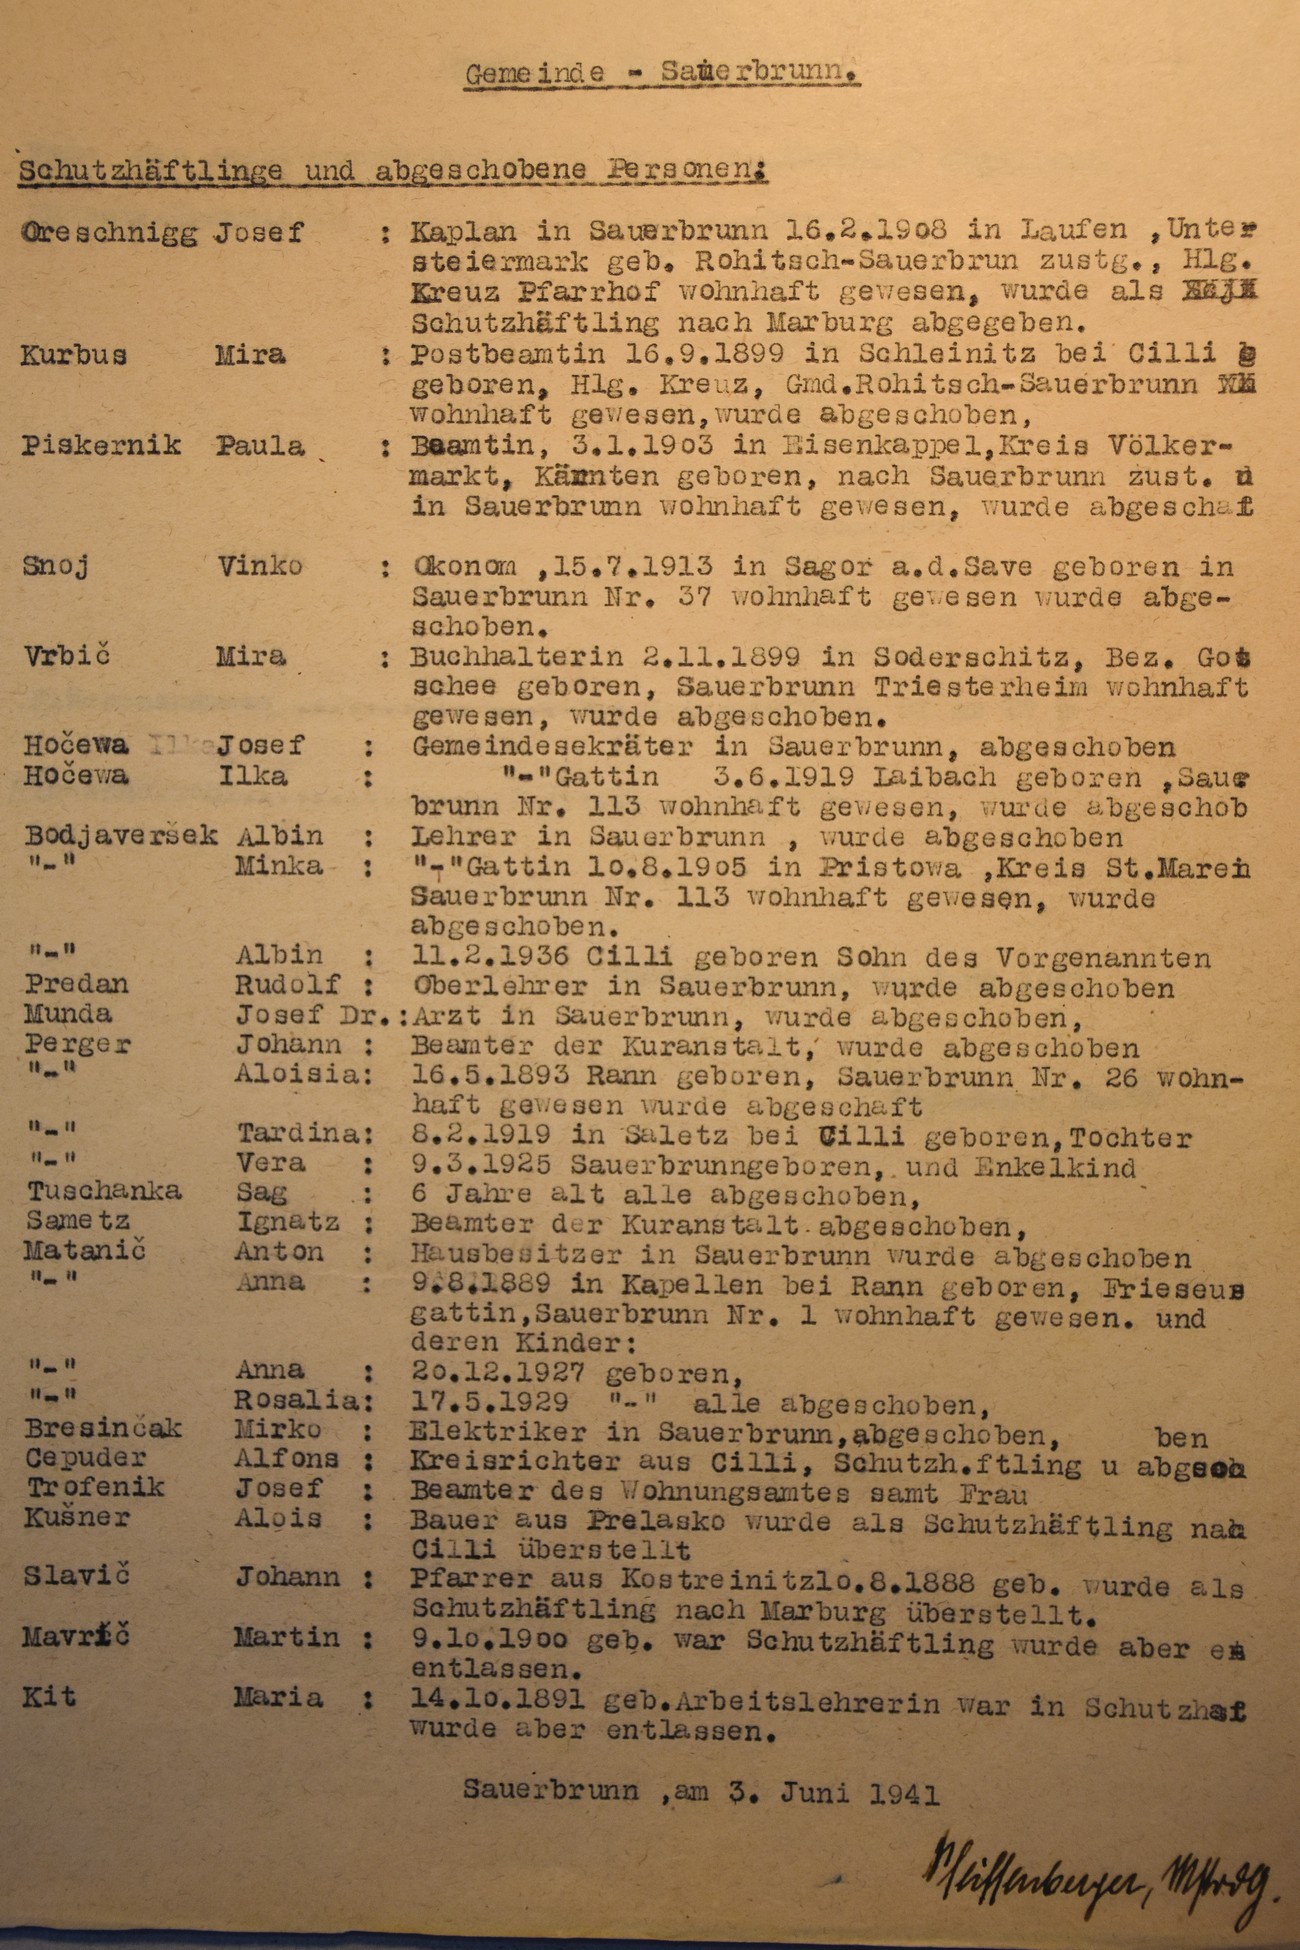 A list of people arrested and exiled in the area of the Municipality of Rogaška Slatina. The list covers the period up to 3 June 1941. The curate from the parish house of the Church of the Cross and the parish priest from Kostrivnica were arrested and transferred to prisons in Maribor. Deportation also befell librarians, doctors, teachers (Rudolf Predan, the head teacher of the school in Sveti Križ was also deported), clerks and secretaries at the municipal hall, at the post office, at the health resort (including Ivan Gračner, the health resort's director until that time), and various landowners. Archives of the RS.